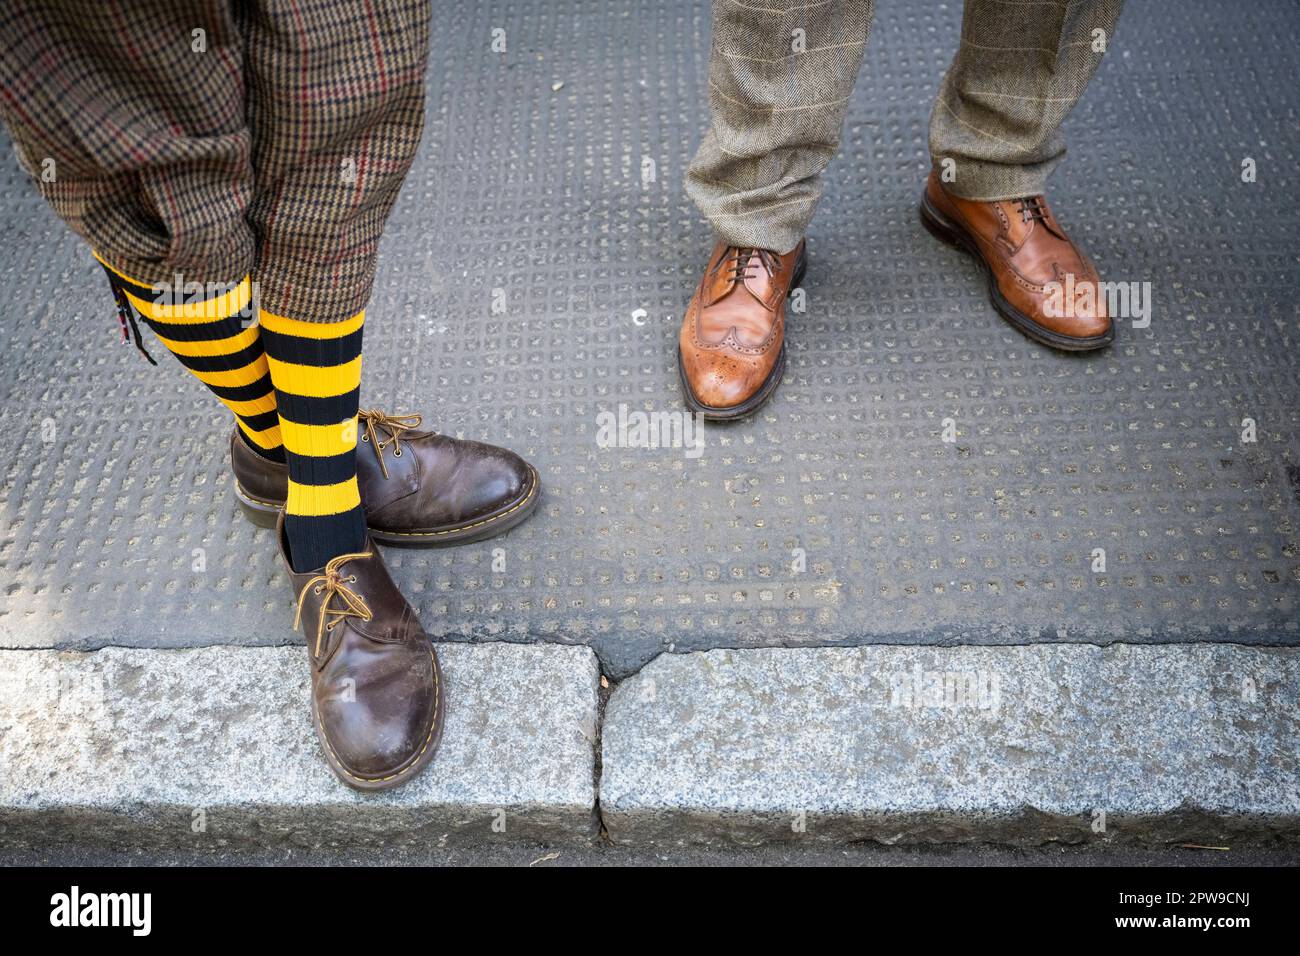 London, UK.  29 April 2023. Striped socks and plus fours. Stylish participants wearing their finest tweeds and brogues take part in the annual Tweed Run by riding bicycles around landmarks in central London, with stops for tea and a picnic en route.  The event has been held since 2009 appealing to the followers of fashion and cycling enthusiasts around the world.  Credit: Stephen Chung / Alamy Live News Stock Photo